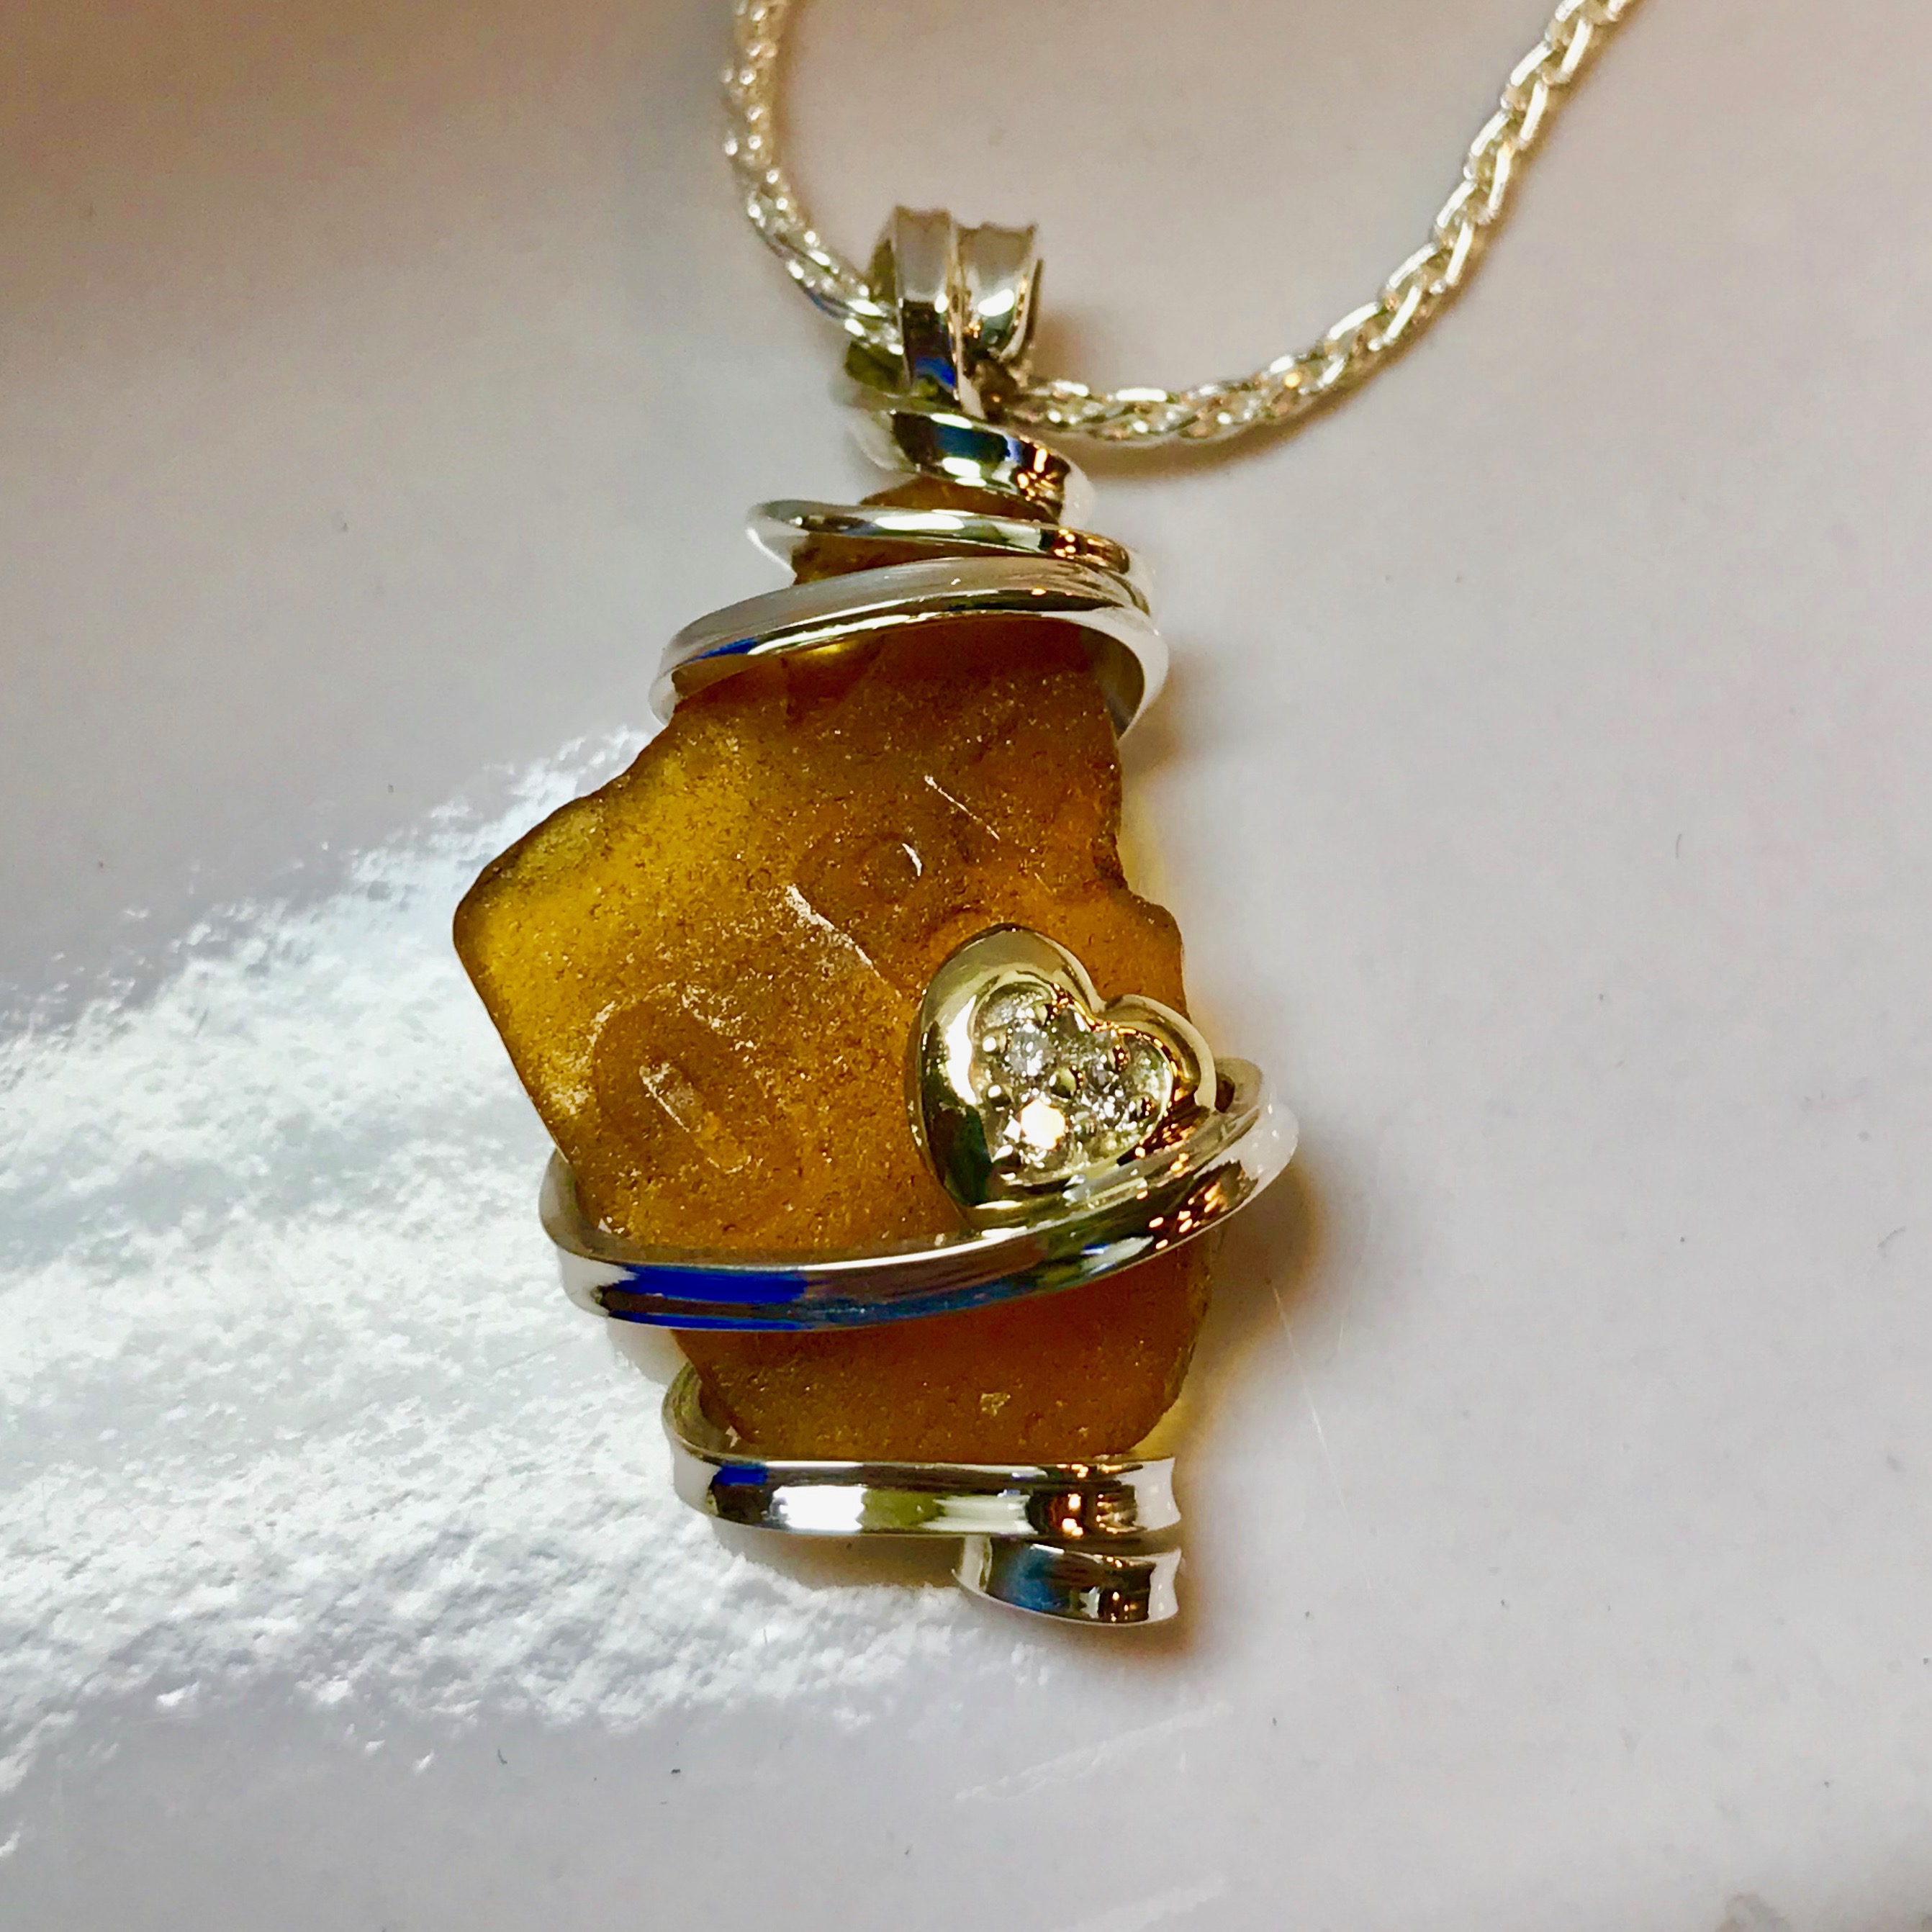 Rare Piece Of Plymouth Beach Glass From Our Stellor Beach Glass Spiral Collection Featured With A Diamond Heart